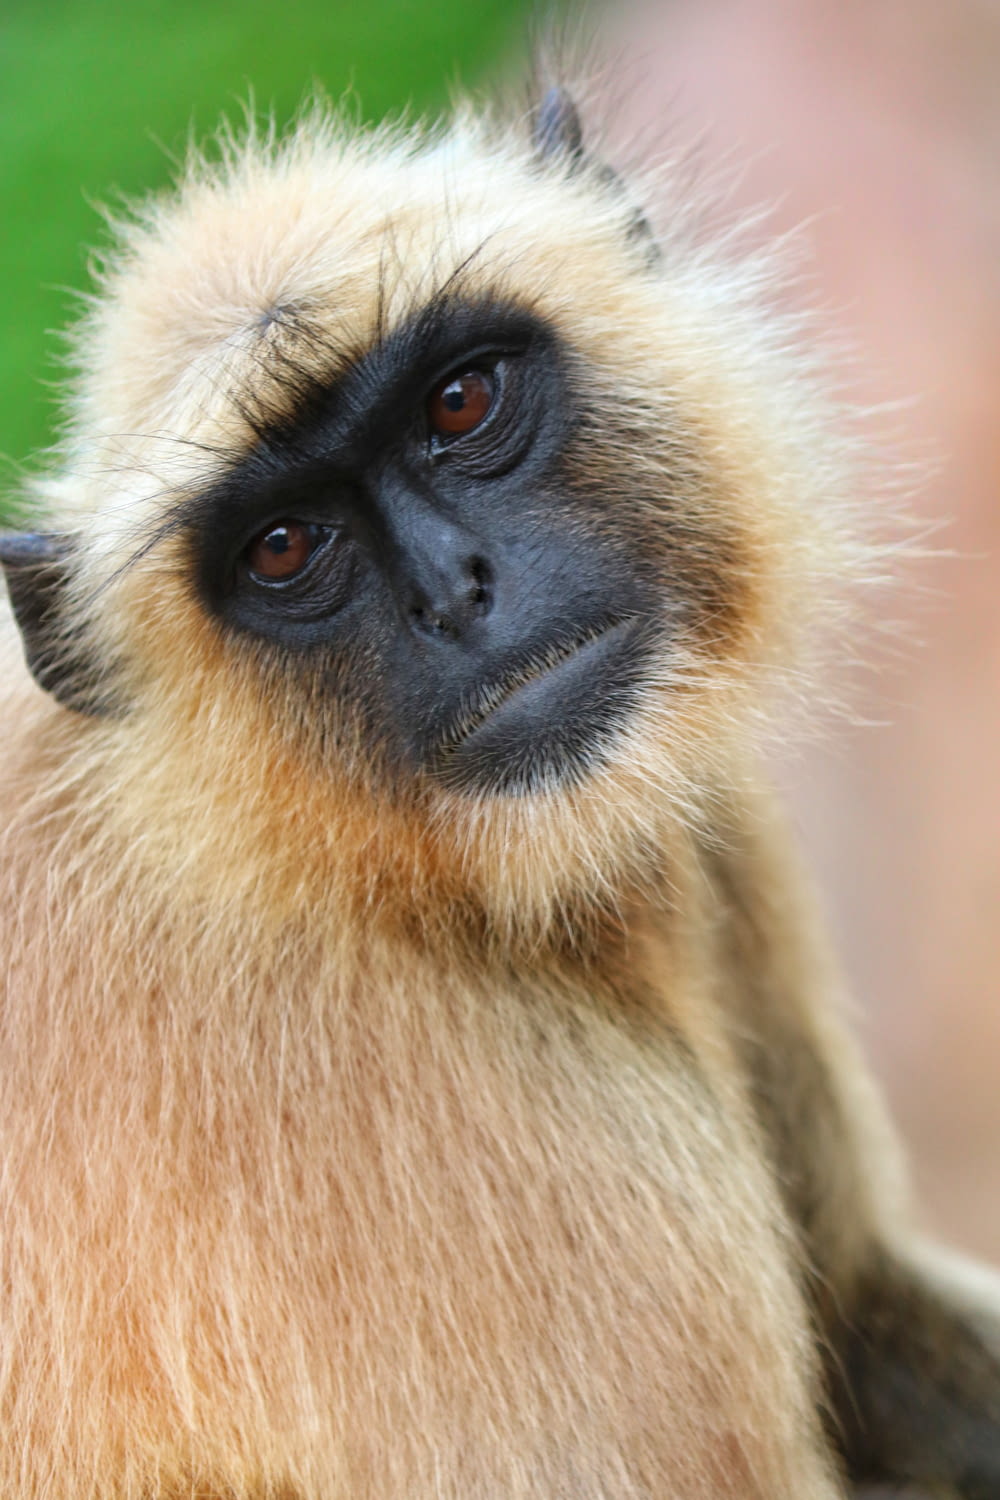 brown and black monkey in close up photography